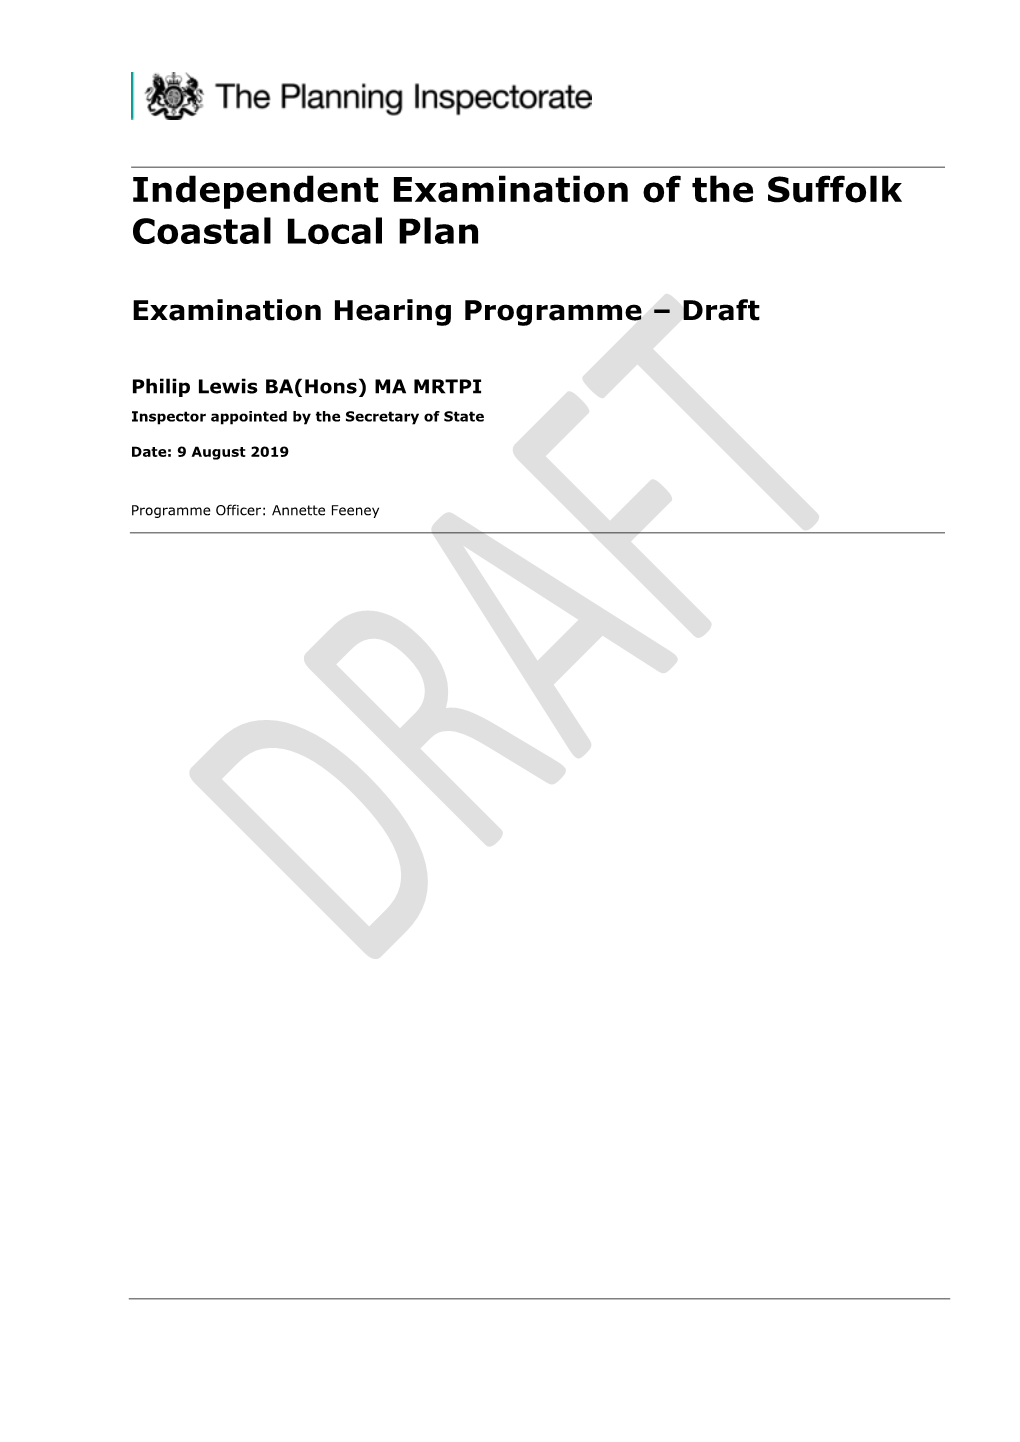 Independent Examination of the Suffolk Coastal Local Plan